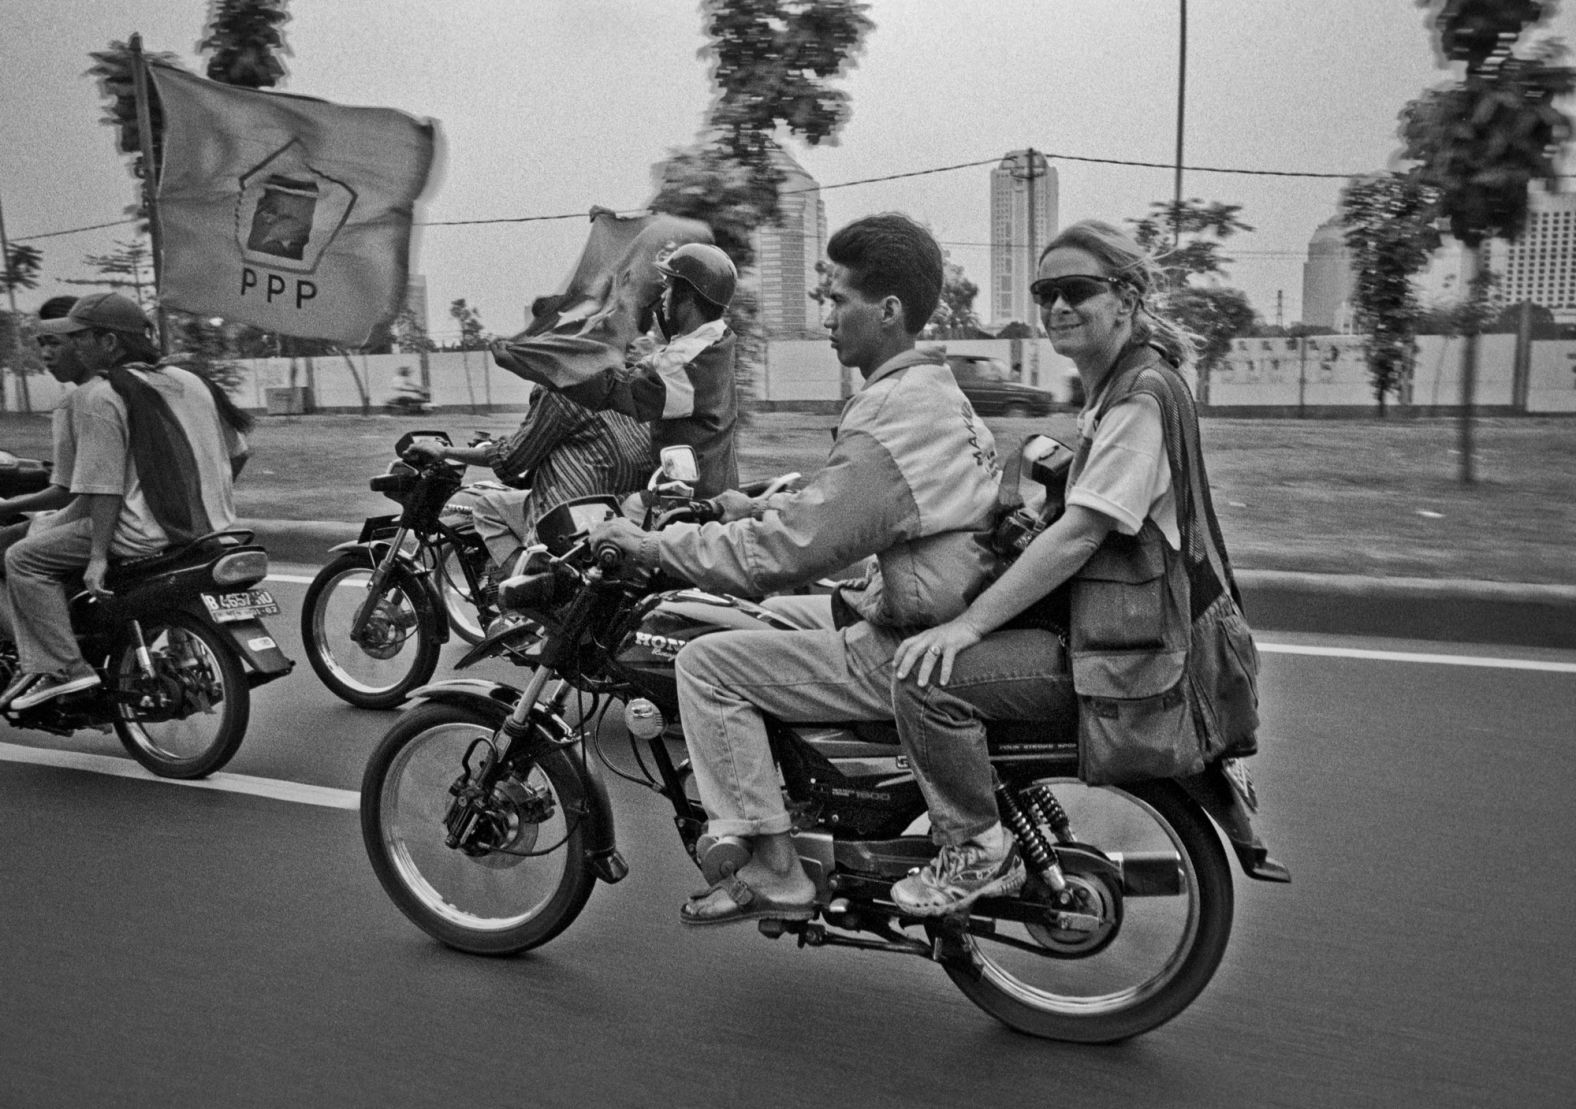 <a href="index.php?page=&url=http%3A%2F%2Fwww.paulaphoto.com%2F" target="_blank" target="_blank">Paula Bronstein</a> rides on the back of a motorbike in Jakarta, Indonesia, in 1998. Bronstein is based in Asia and has photographed many conflict areas over the past three decades. "Often I try to focus on underreported stories that deal with the human, economic and political issues exposing the silent victims of conflict," she said. Her acclaimed book "Afghanistan: Between Hope and Fear" <a href="index.php?page=&url=https%3A%2F%2Fwww.cnn.com%2F2016%2F05%2F31%2Fmiddleeast%2Fcnnphotos-afghanistan-between-hope-and-fear%2Findex.html" target="_blank">documented daily life in the country</a>.